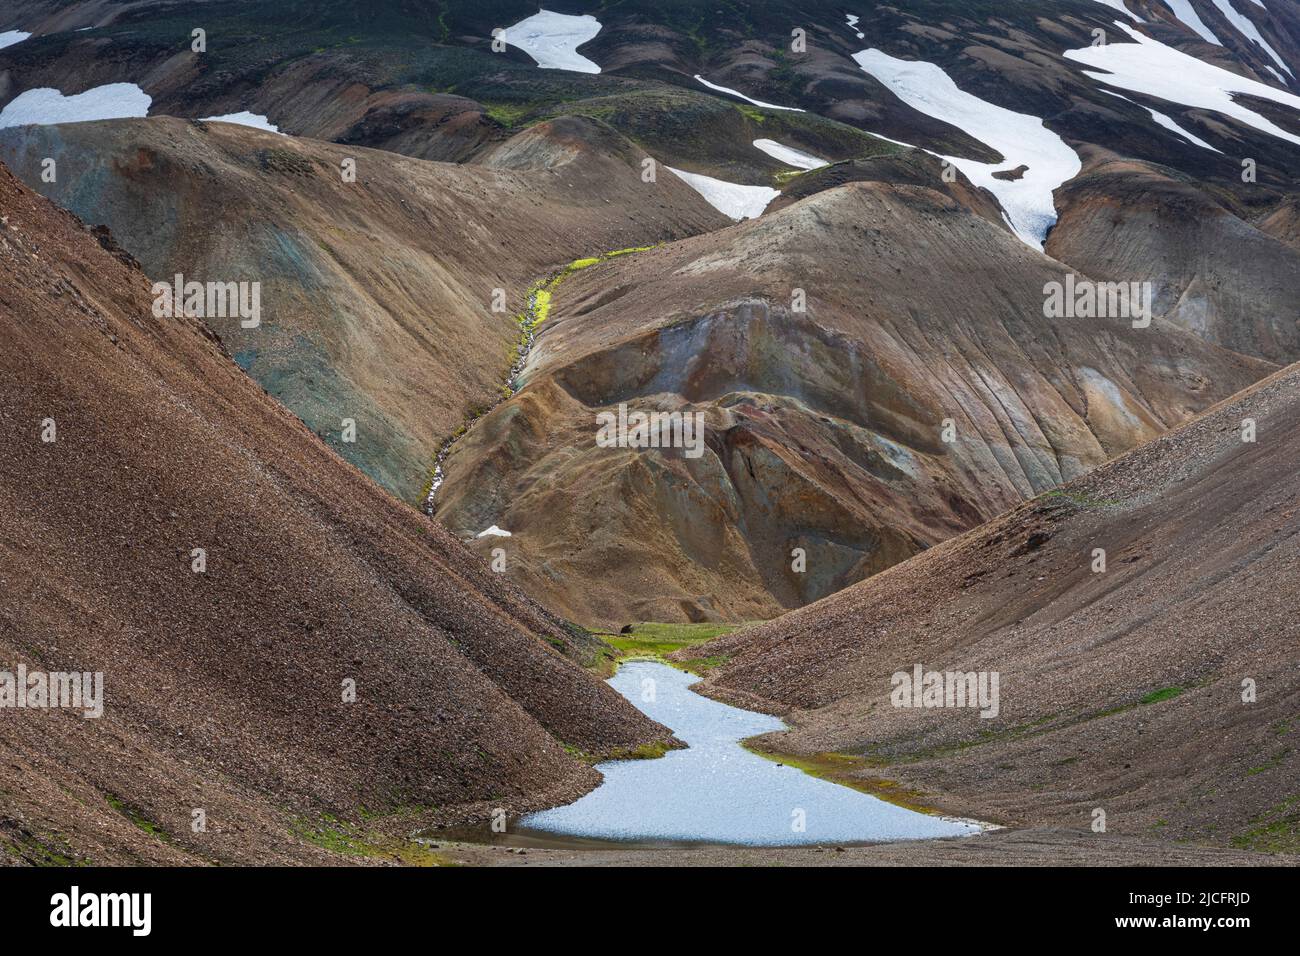 Laugavegur hiking trail is the most famous multi-day trekking tour in Iceland. Landscape shot from the area around Landmannalaugar, starting point of the long-distance hiking trail in the highlands of Iceland. Mountain lake. Stock Photo